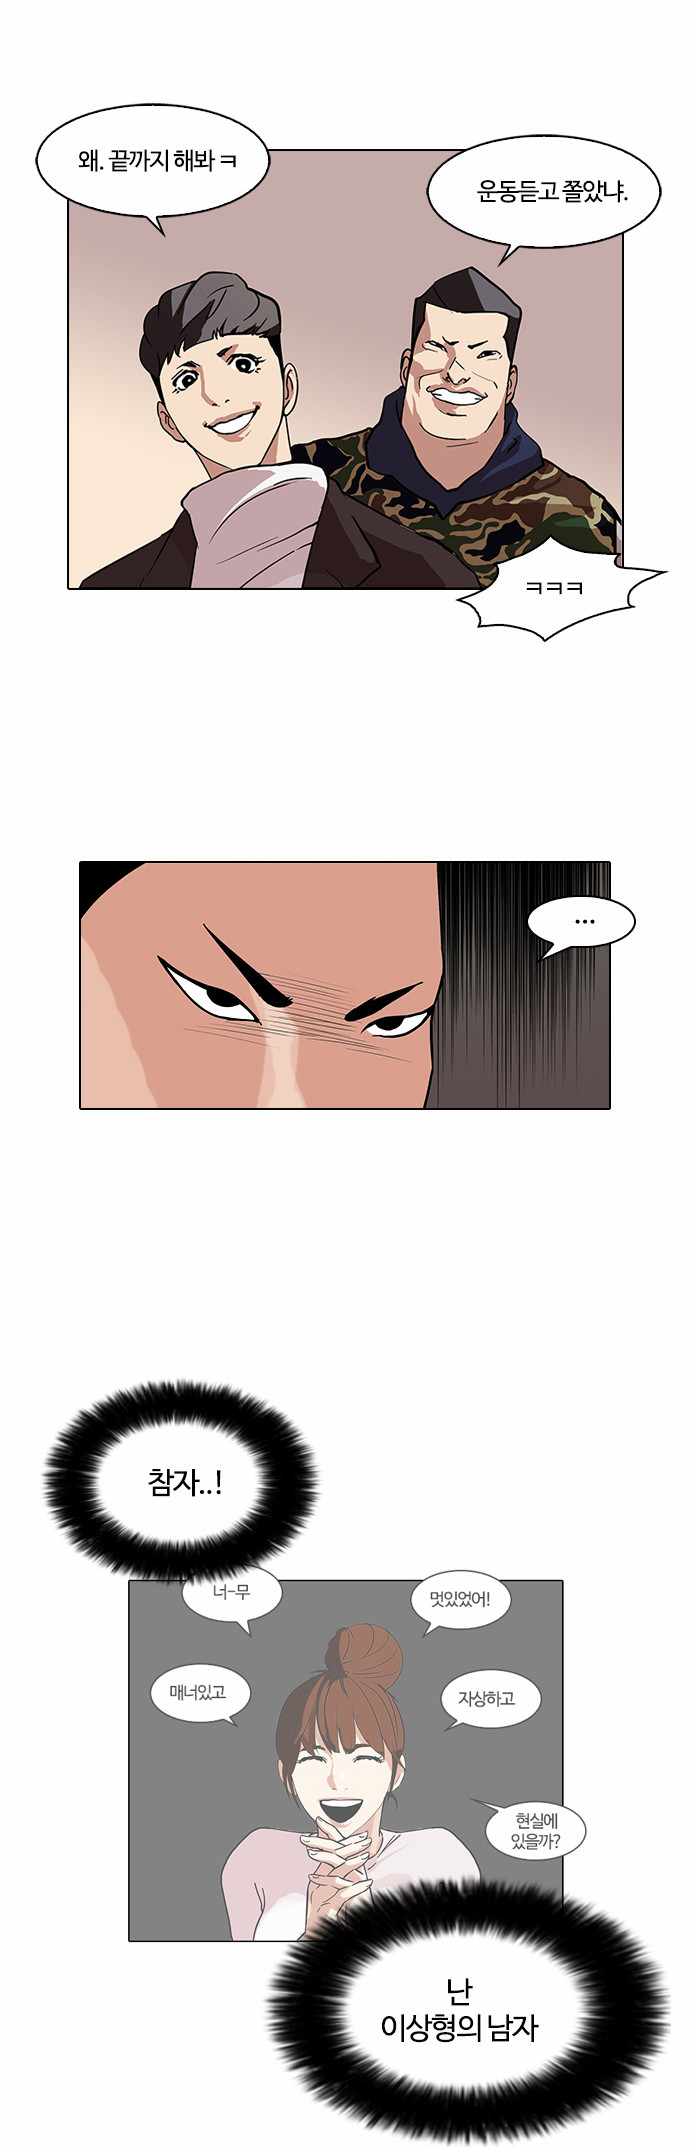 Lookism - Chapter 74 - Page 4